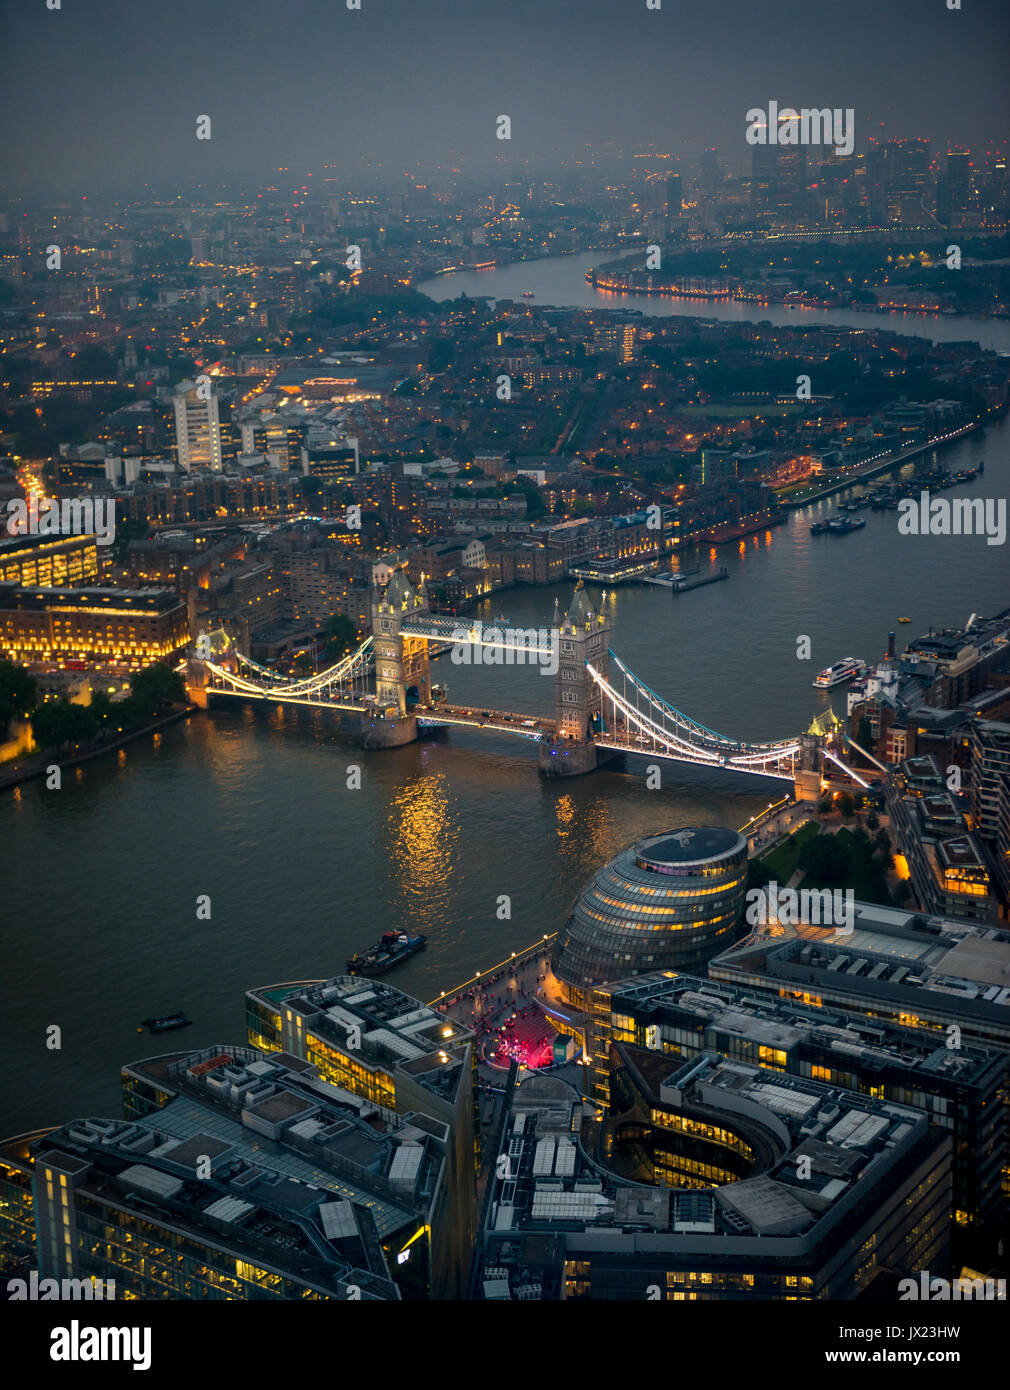 View of River Thames towards Canary Wharf, illuminated Tower Bridge with London City Hall, night shot, aerial view, London Stock Photo